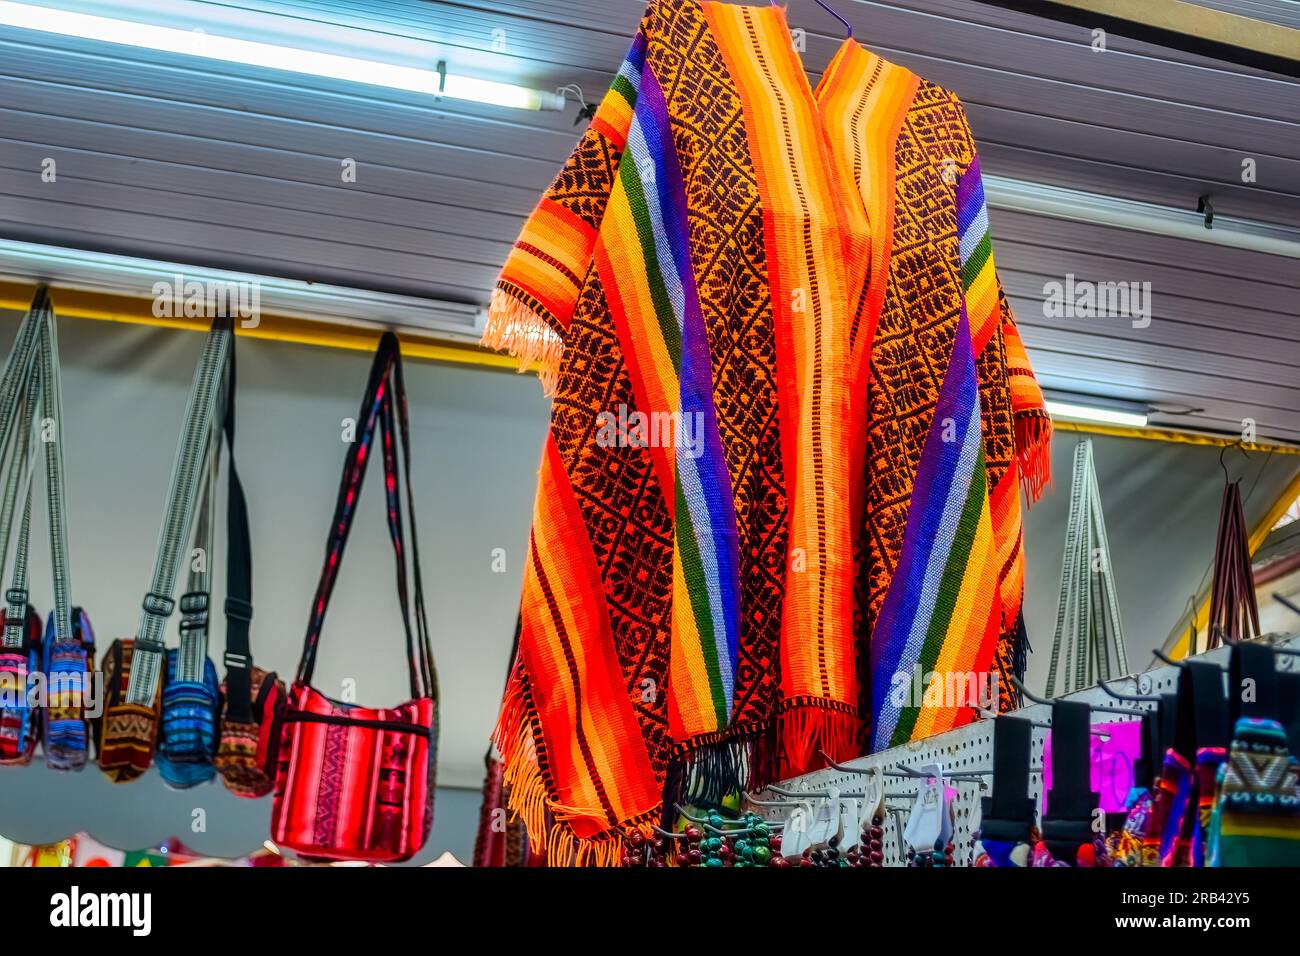 Rio de Janeiro, Brazil - June 15, 2023: Retail activity in the city. Small business merchandise and lifestyle. Stock Photo